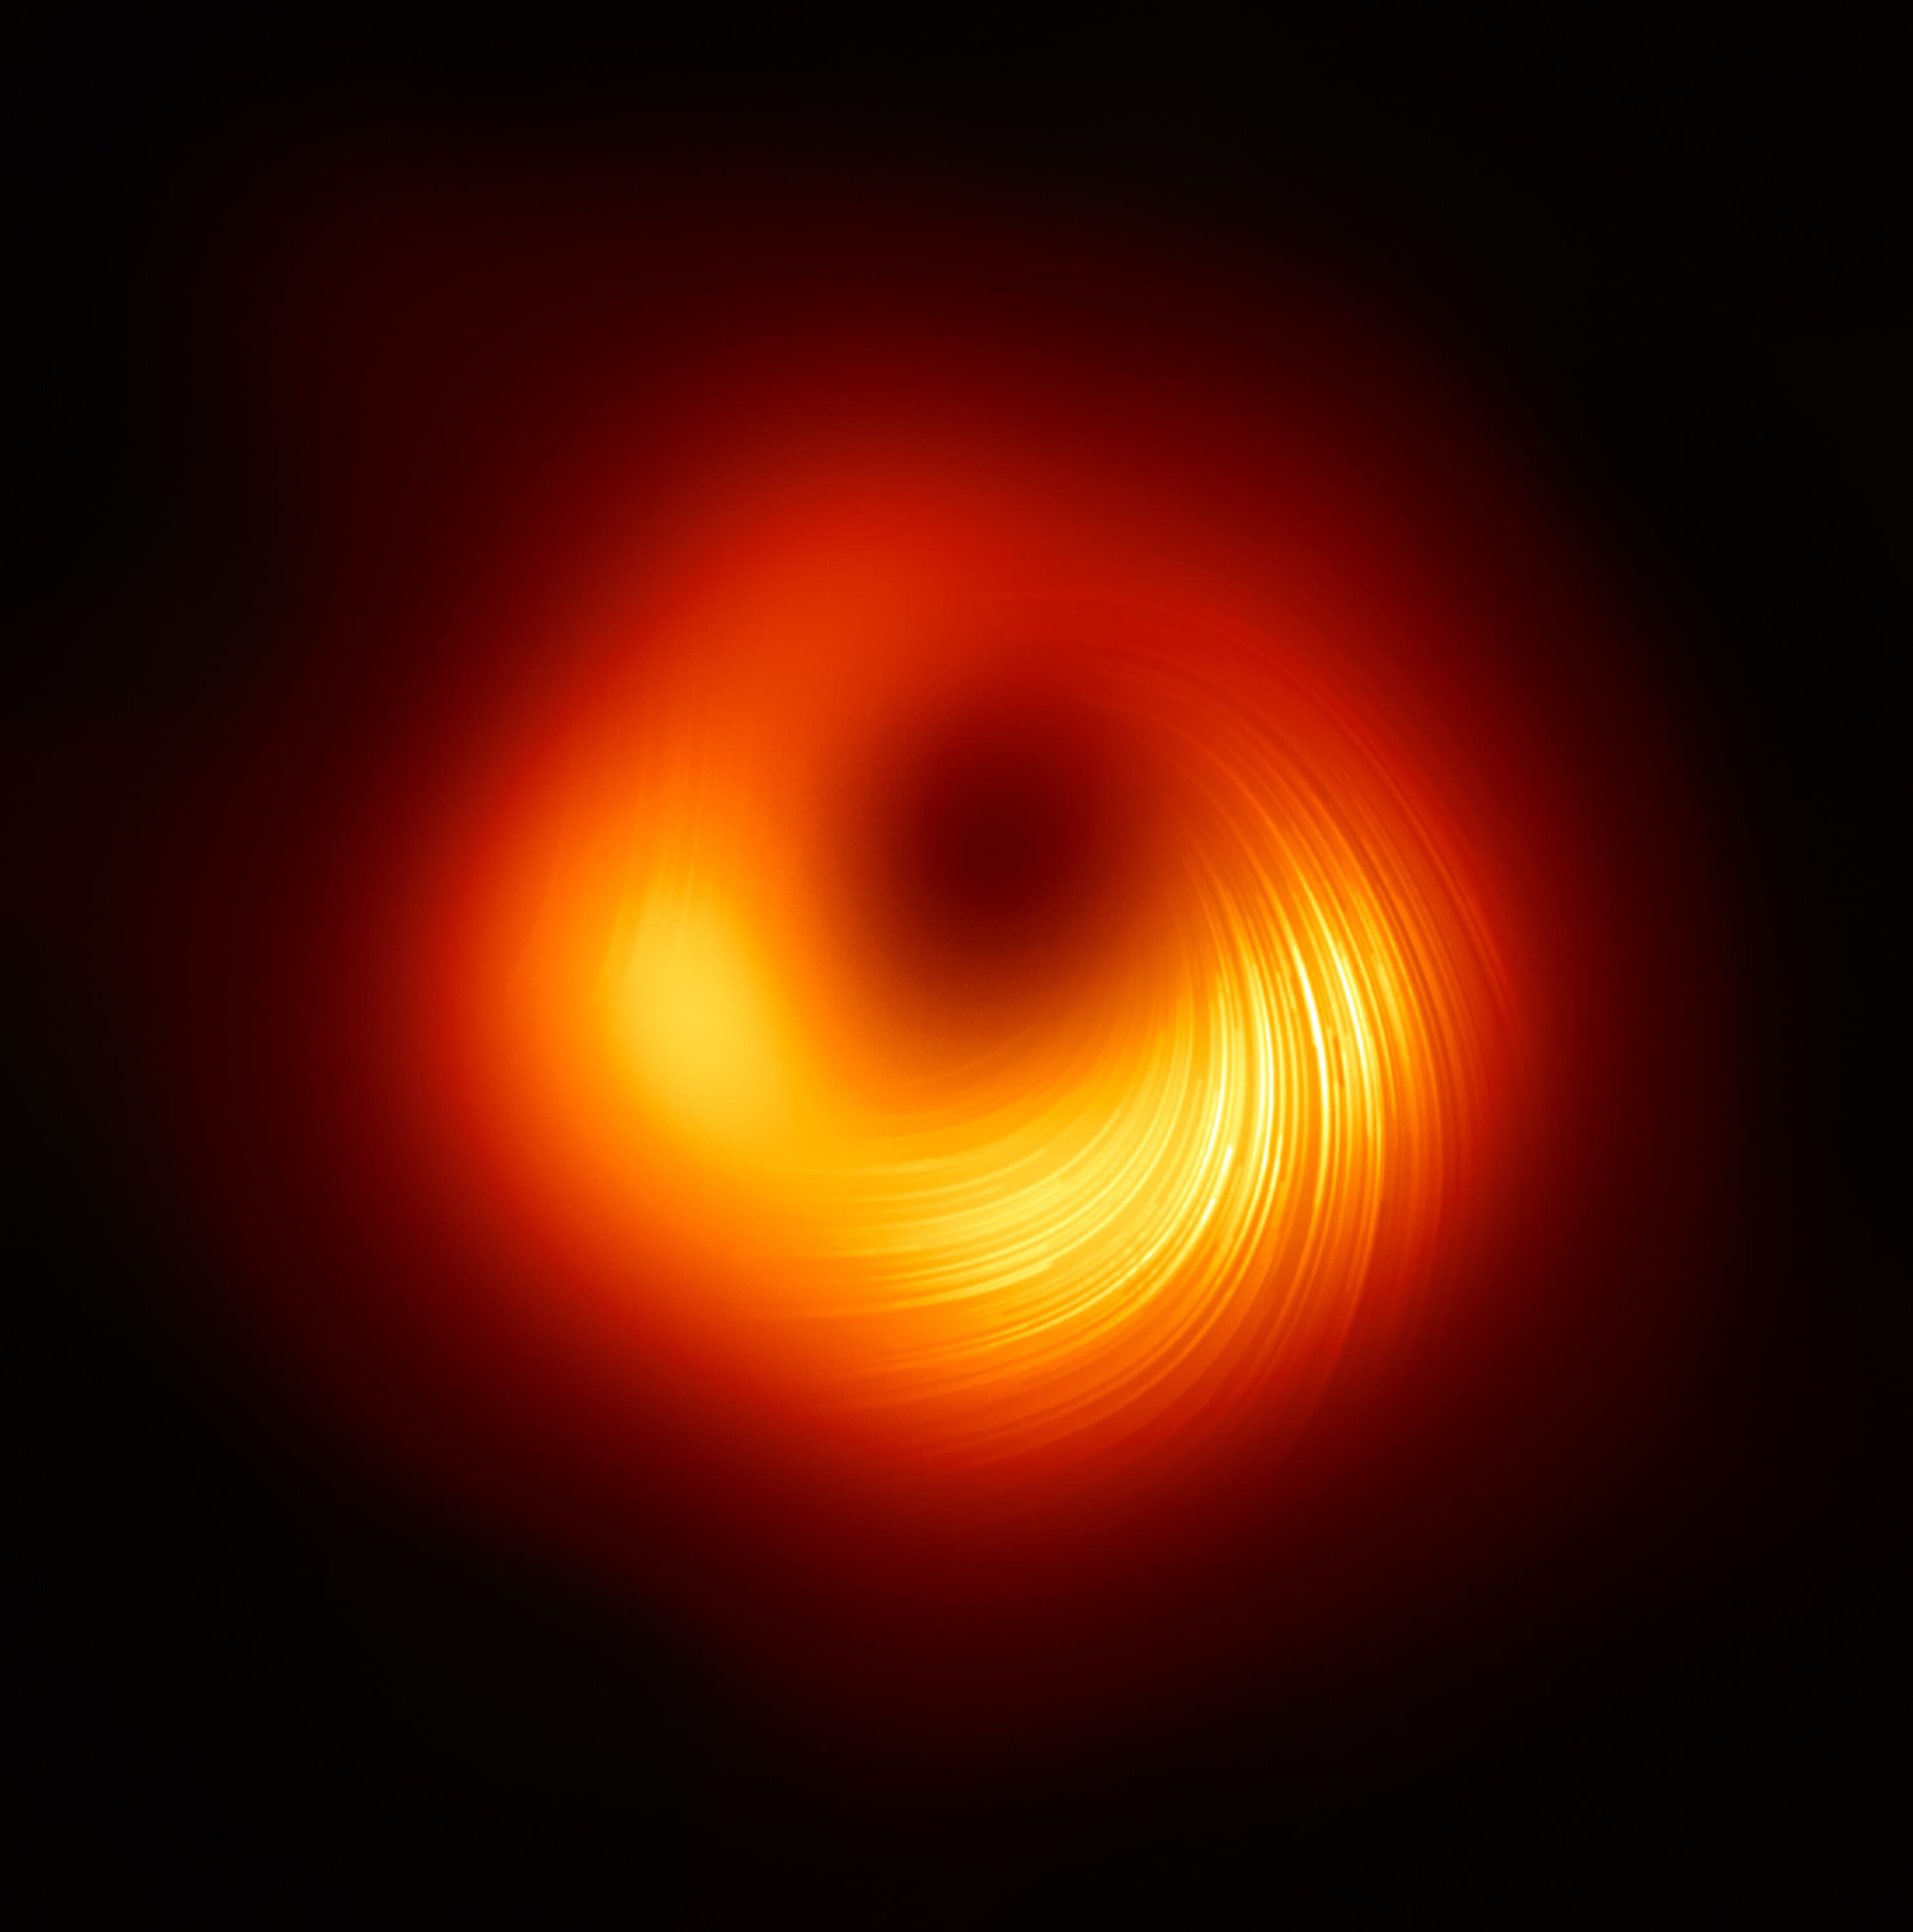 Astronomers Measure Magnetic Field Around M87* Black Hole